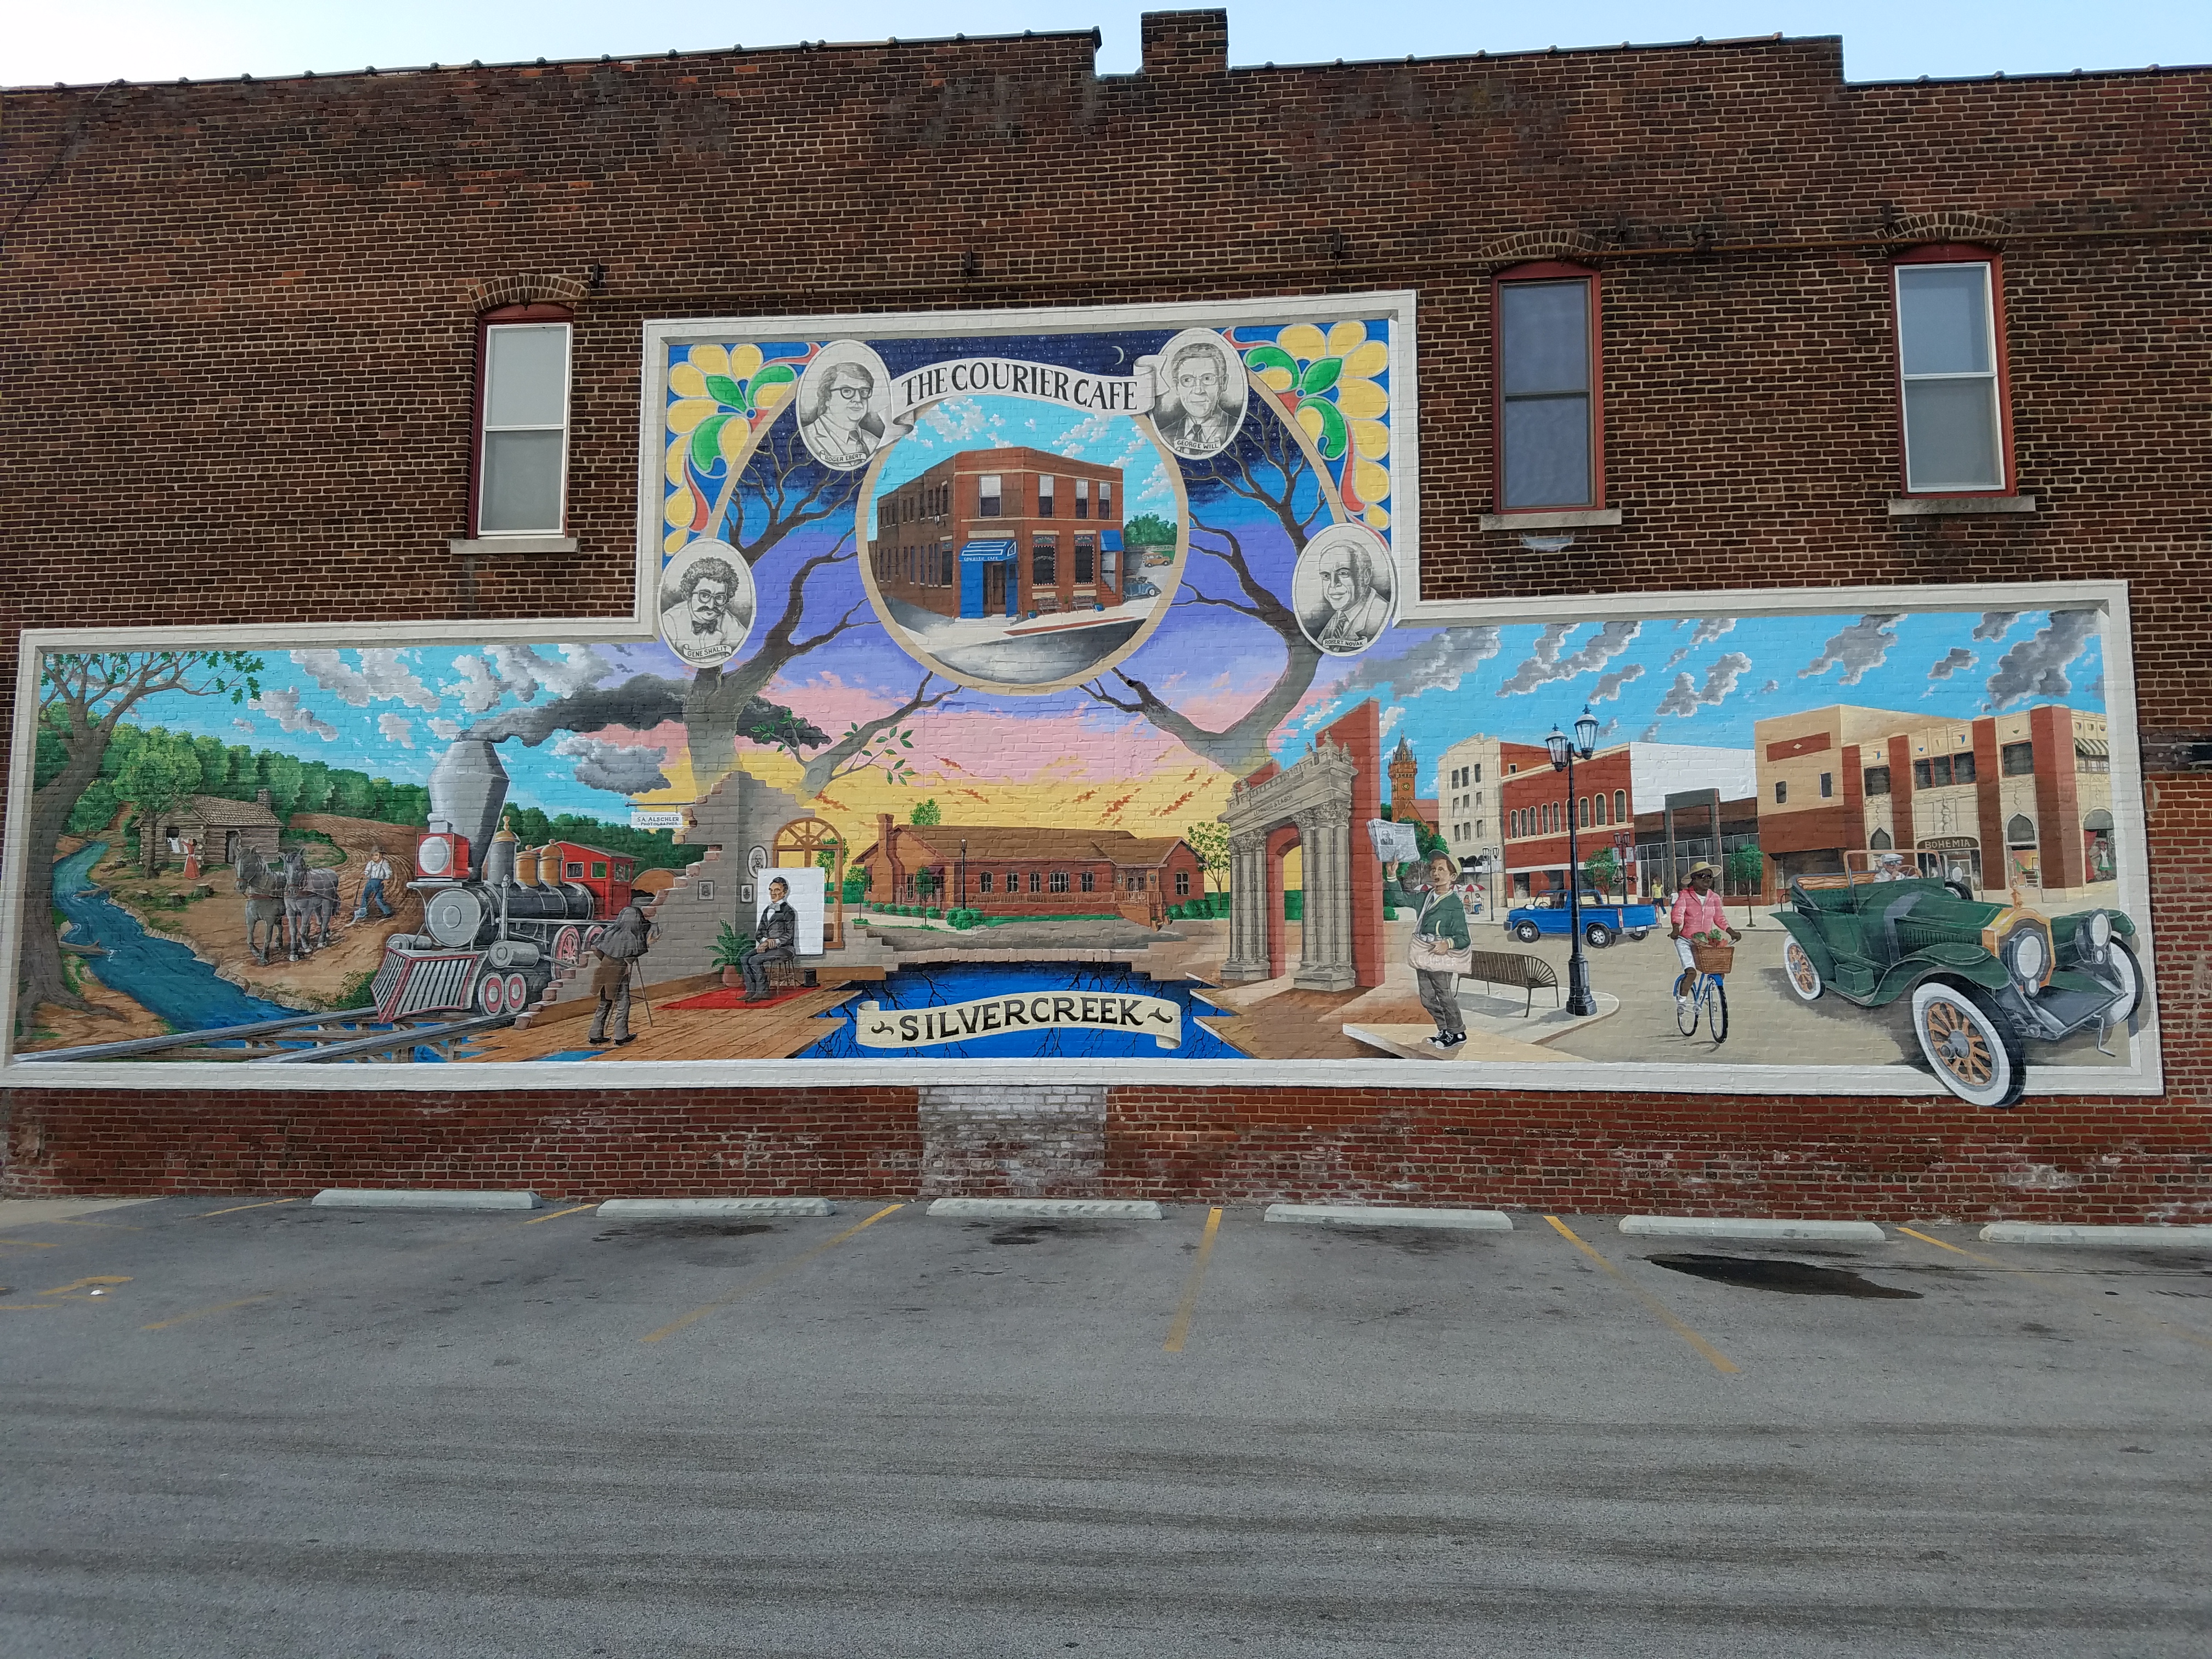 On another side of the exterior of the building, an intricate and large mural covers the entire brick side. It consists of various vibrant colors depicting the origin of the Courier Cafe and its sister restaurant, Silver Creek. The painting is full of old trains, cars, and the four men who started the Courier newspaper originally. Photo by Allen Strong.